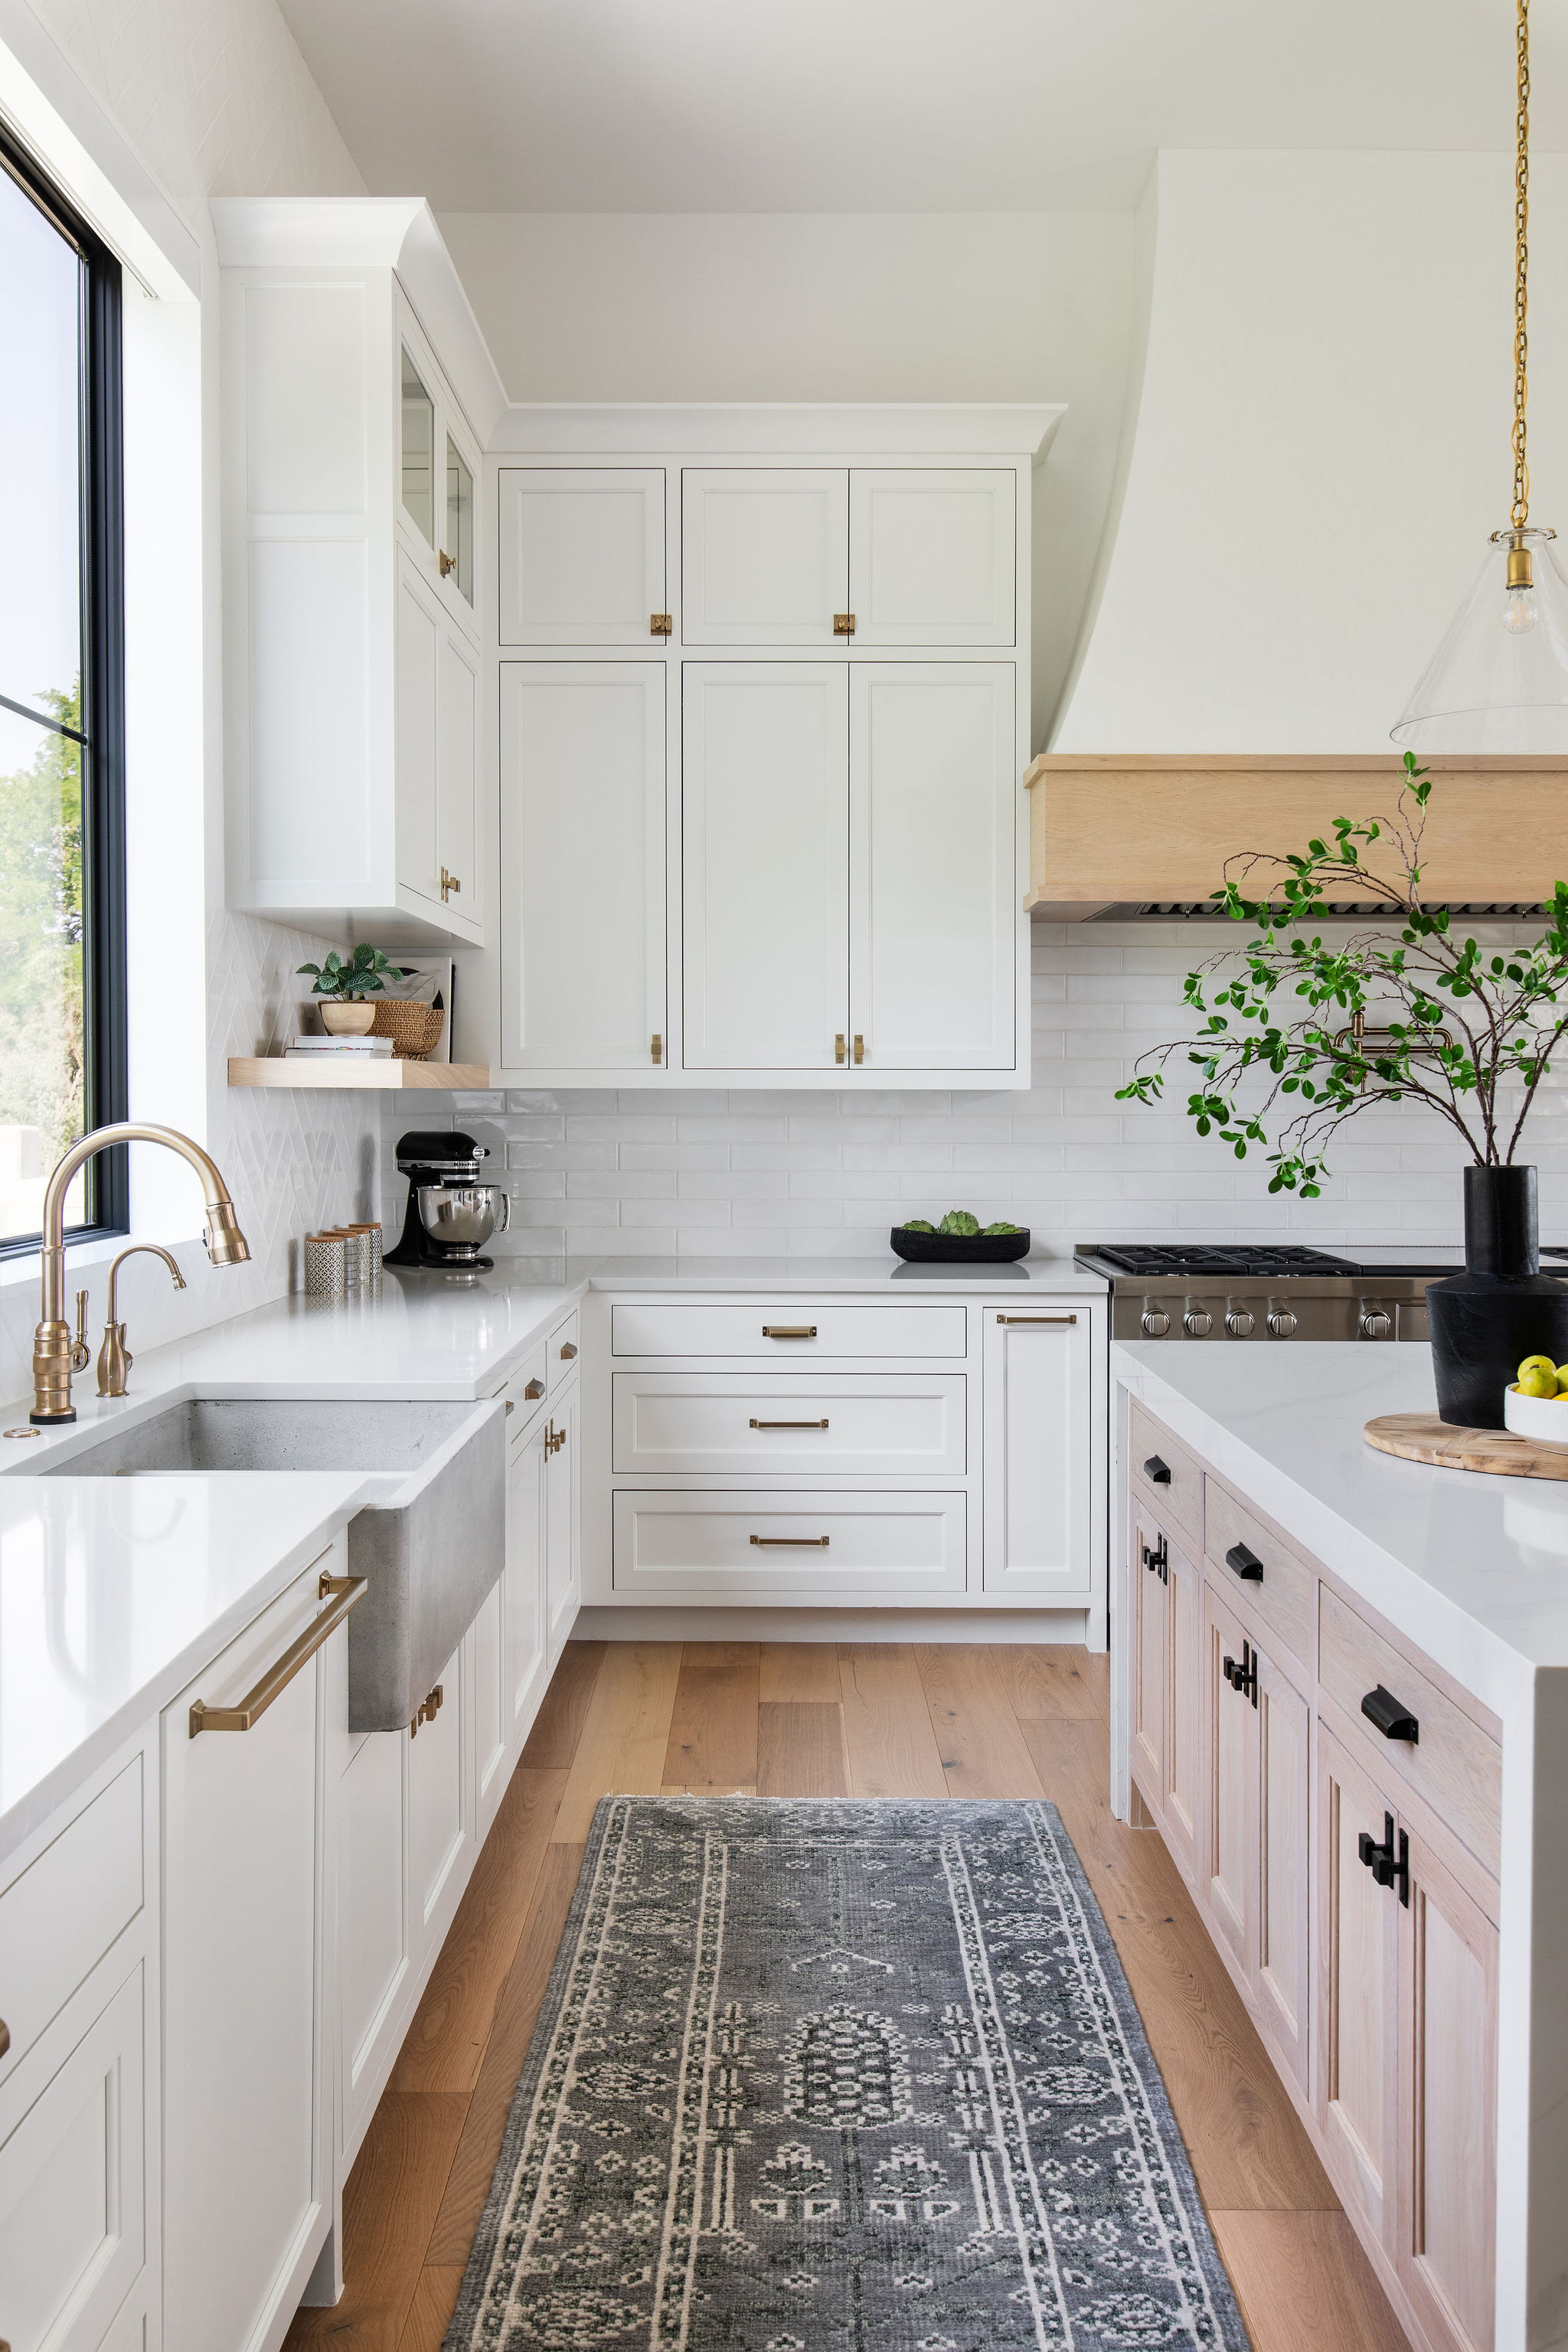 A white kitchen with white quartz countertops, a blue patterned runner, and wooden flooring